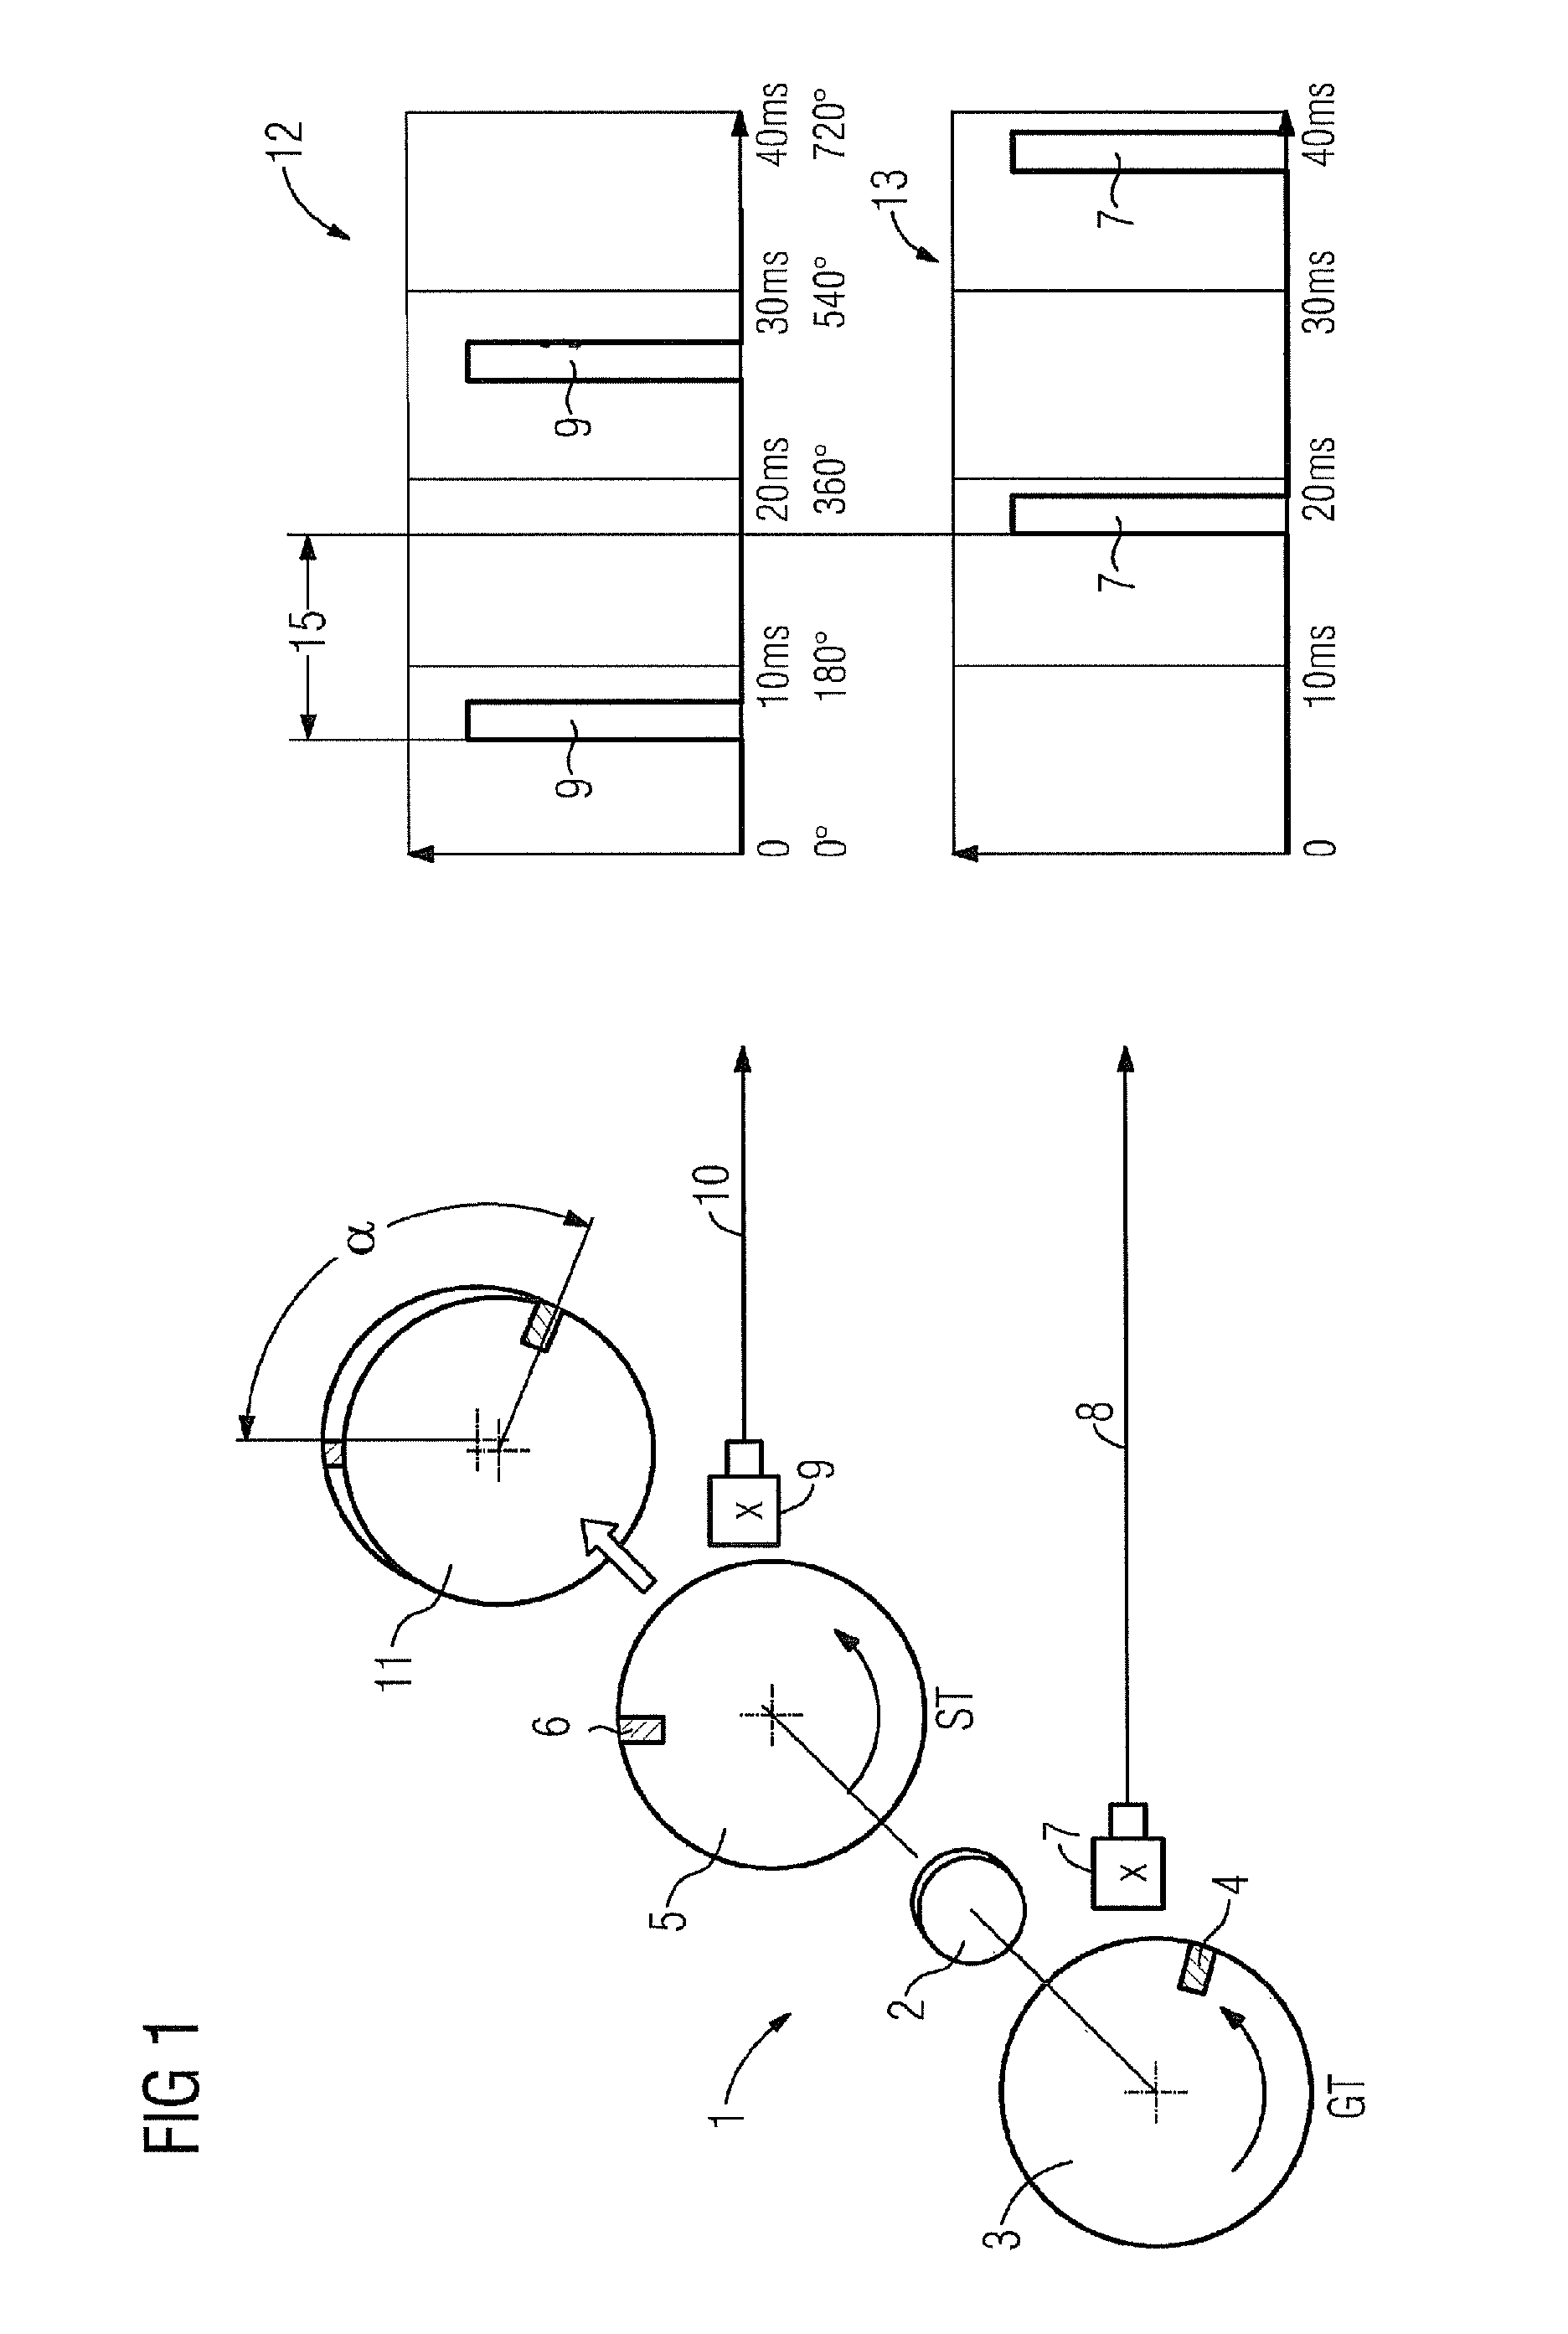 Method for determining a twist angle